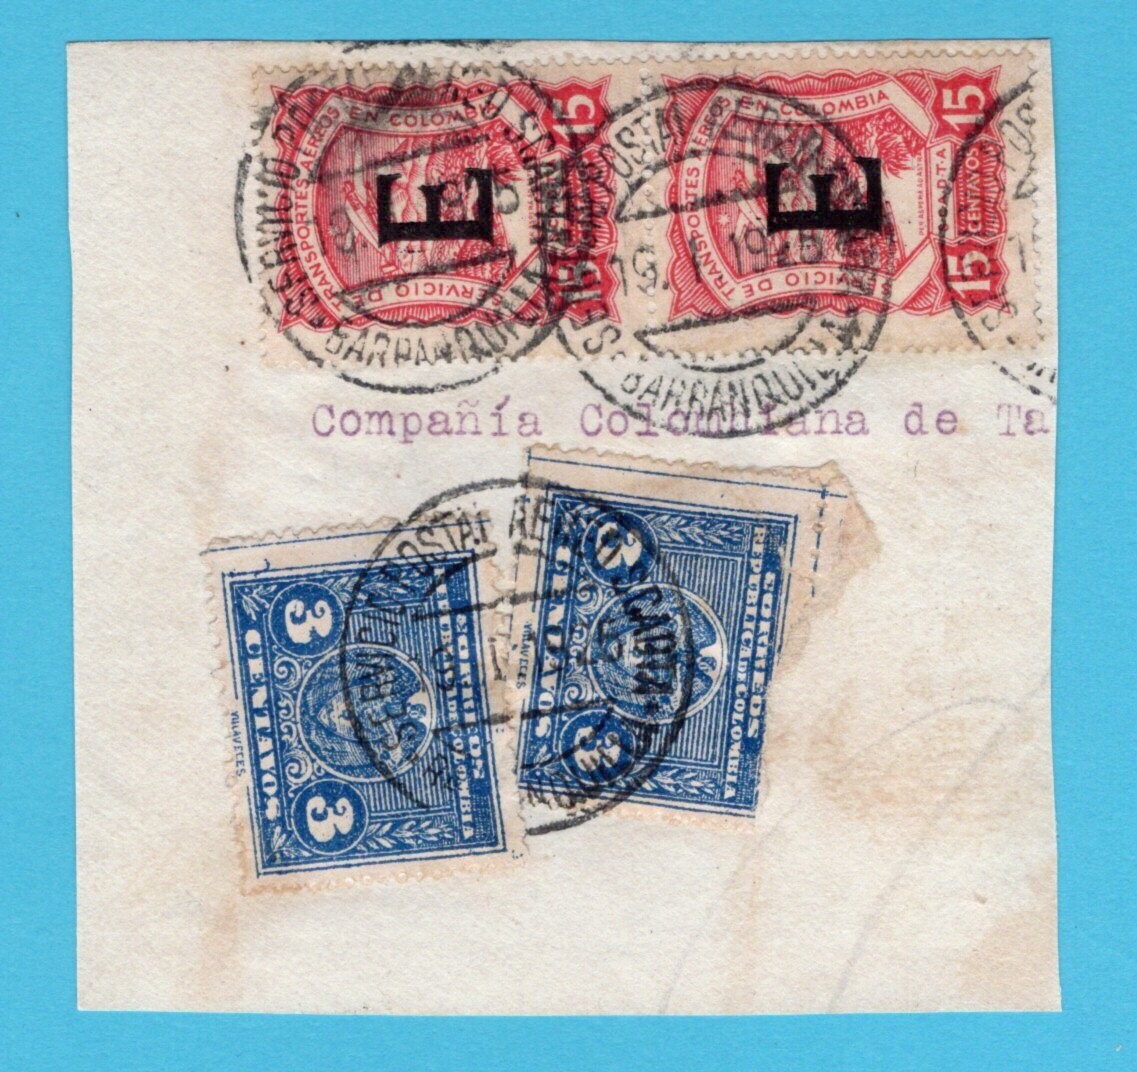 COLOMBIA piece 1925 Barranquilla with SCADTA stamps for Spain